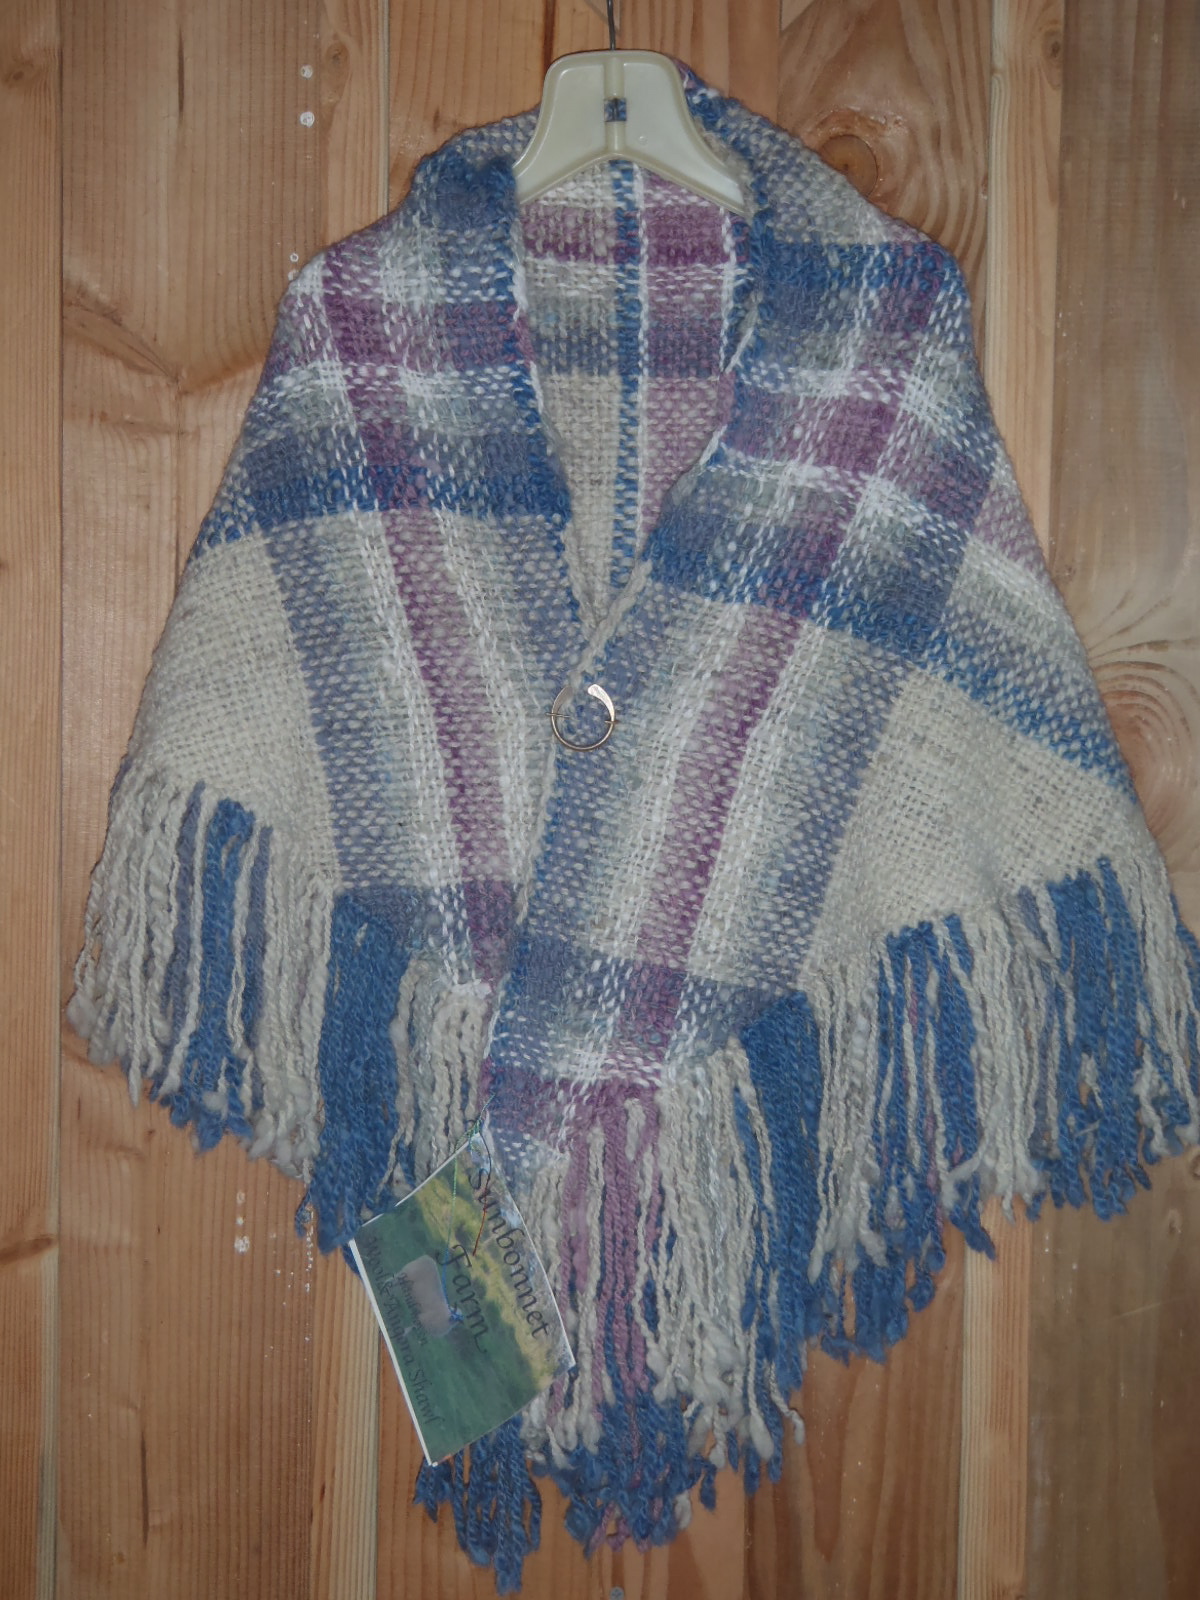 Photo of the blue and purple shawl.